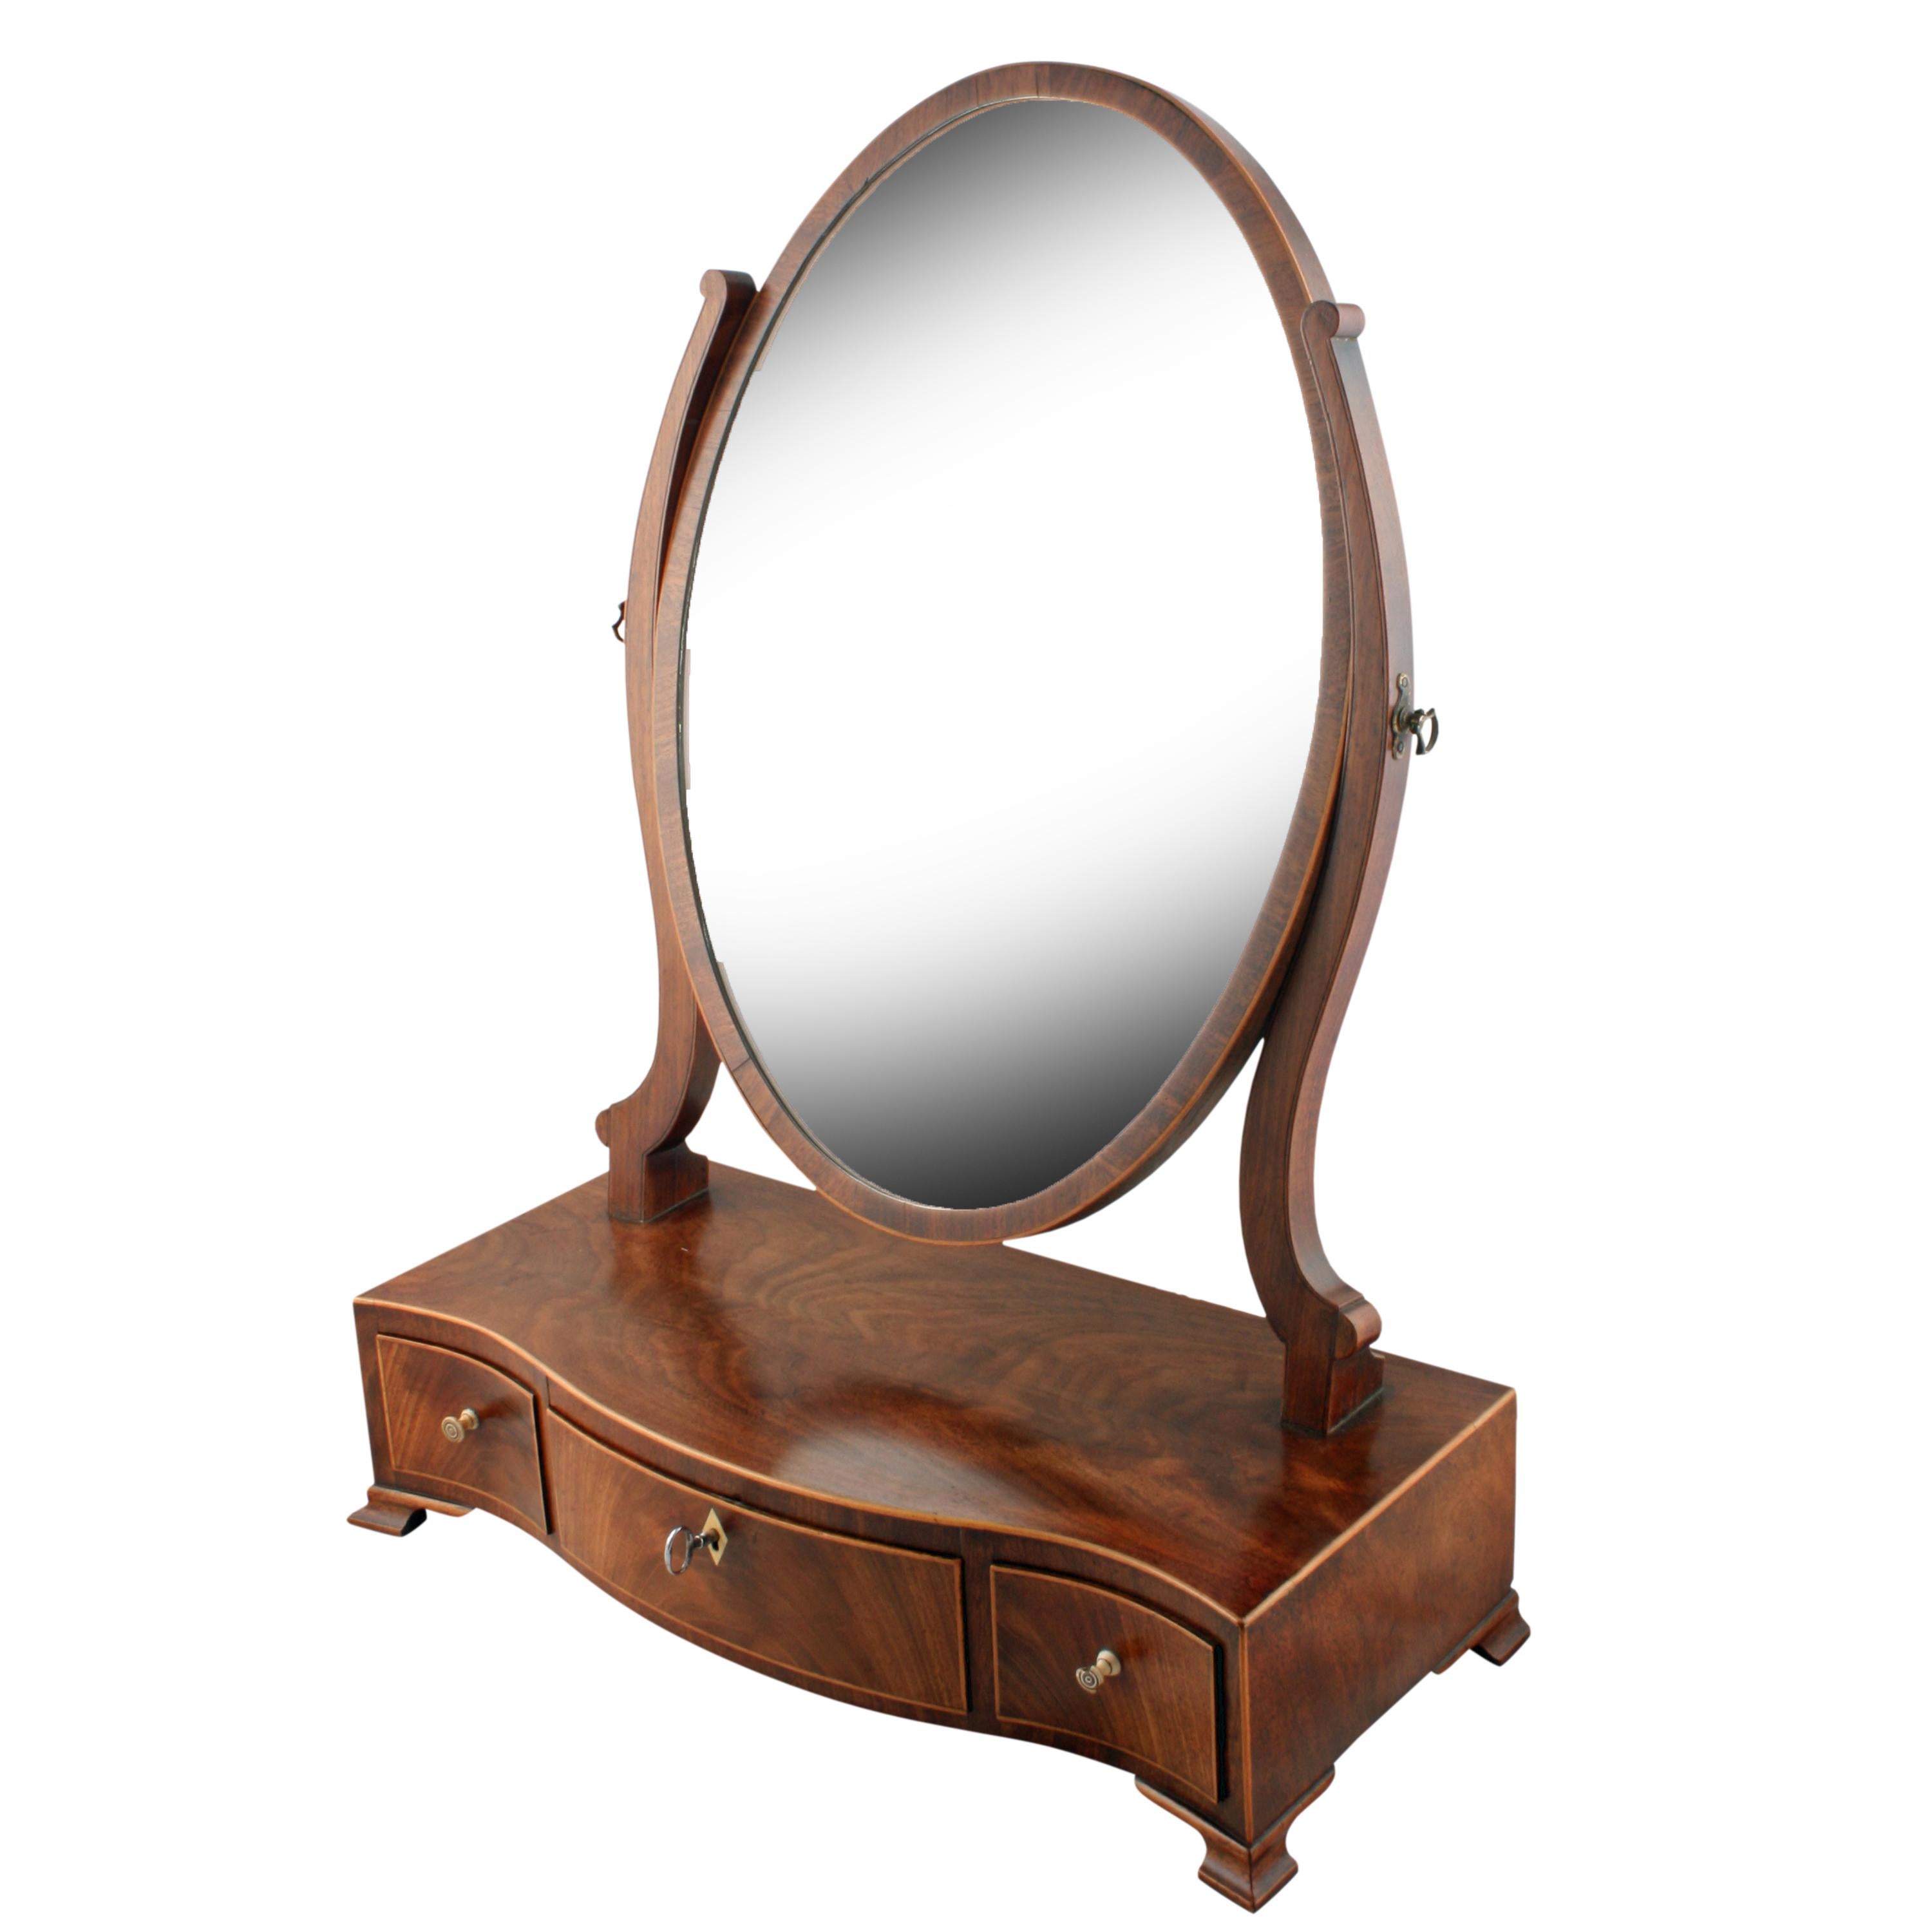 A late 18th to early 19th century Georgian mahogany three-drawer dressing mirror.

The mirror plate is in a mahogany frame with a box wood edge that is held between two shaped arms and rotates on a pair of brass knobs.

The serpentine shaped